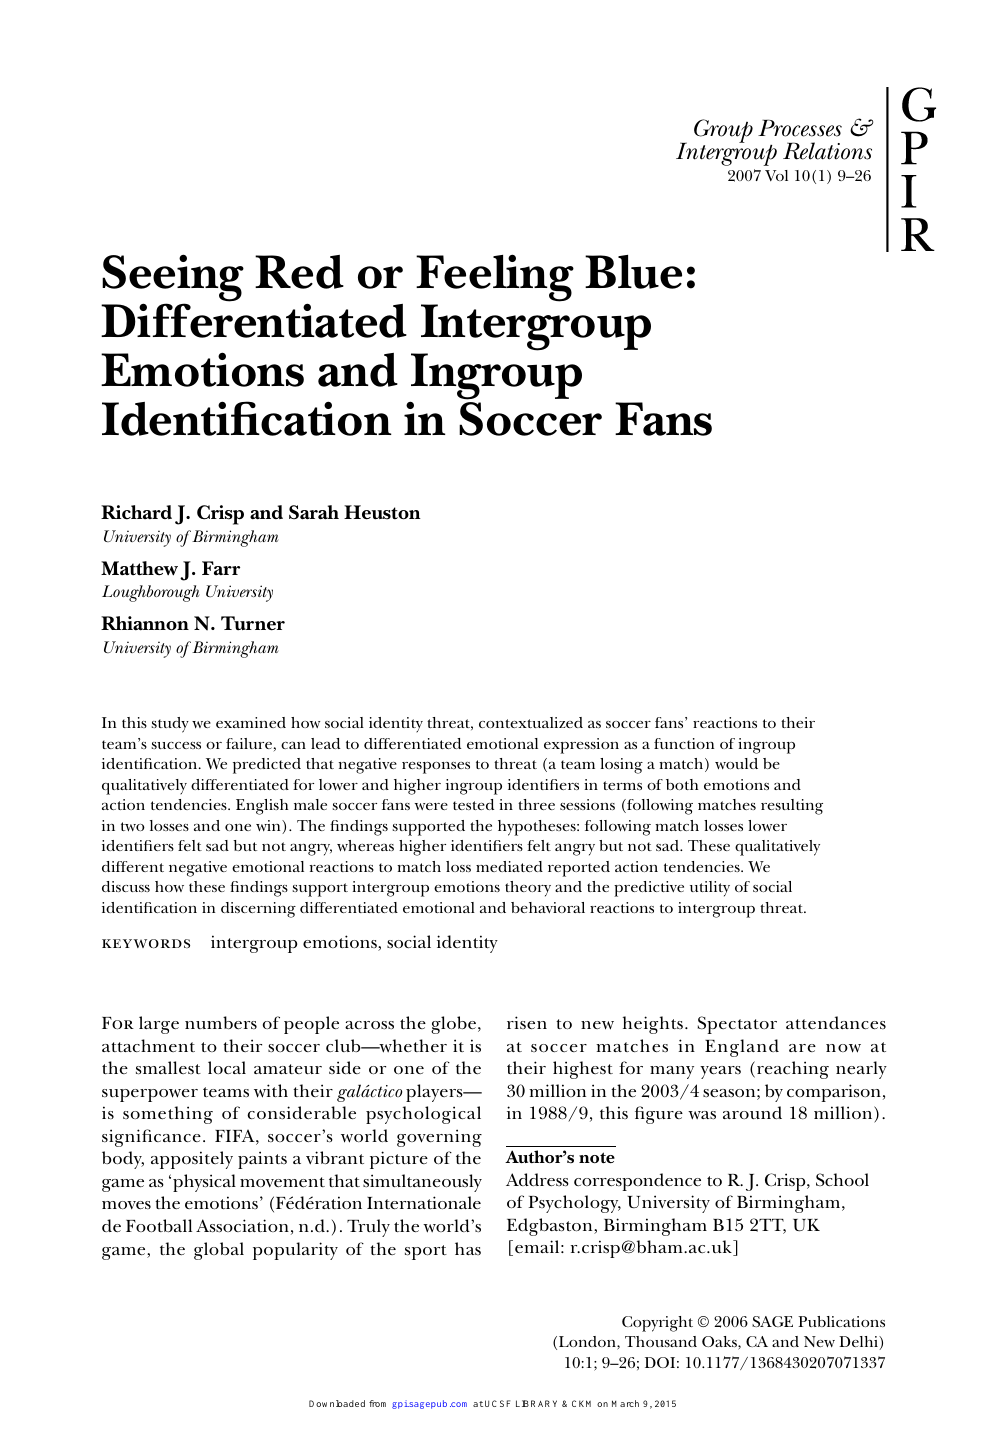 Seeing Red Or Feeling Blue Differentiated Intergroup - 